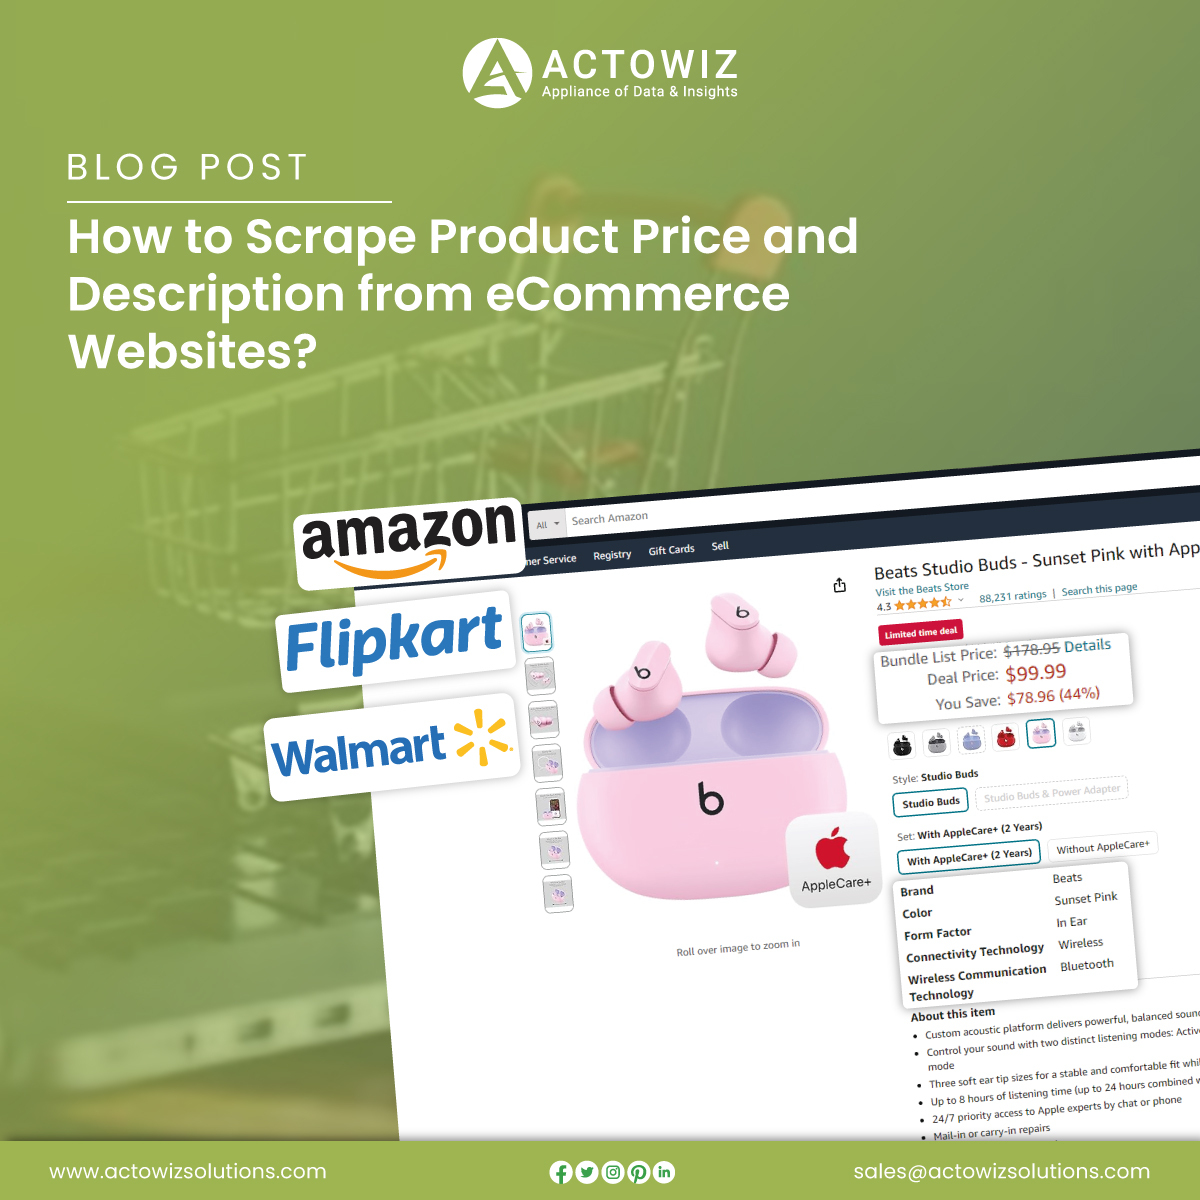 Learn efficient methods for extracting product prices and descriptions from eCommerce websites using web scraping techniques. actowizsolutions.com/scrape-product… #ScrapeProductDescription #ScrapeProductPrice #ExtractProductPrice #ExtractProductDescription #actowizsolutions #UAE #UK #UAE